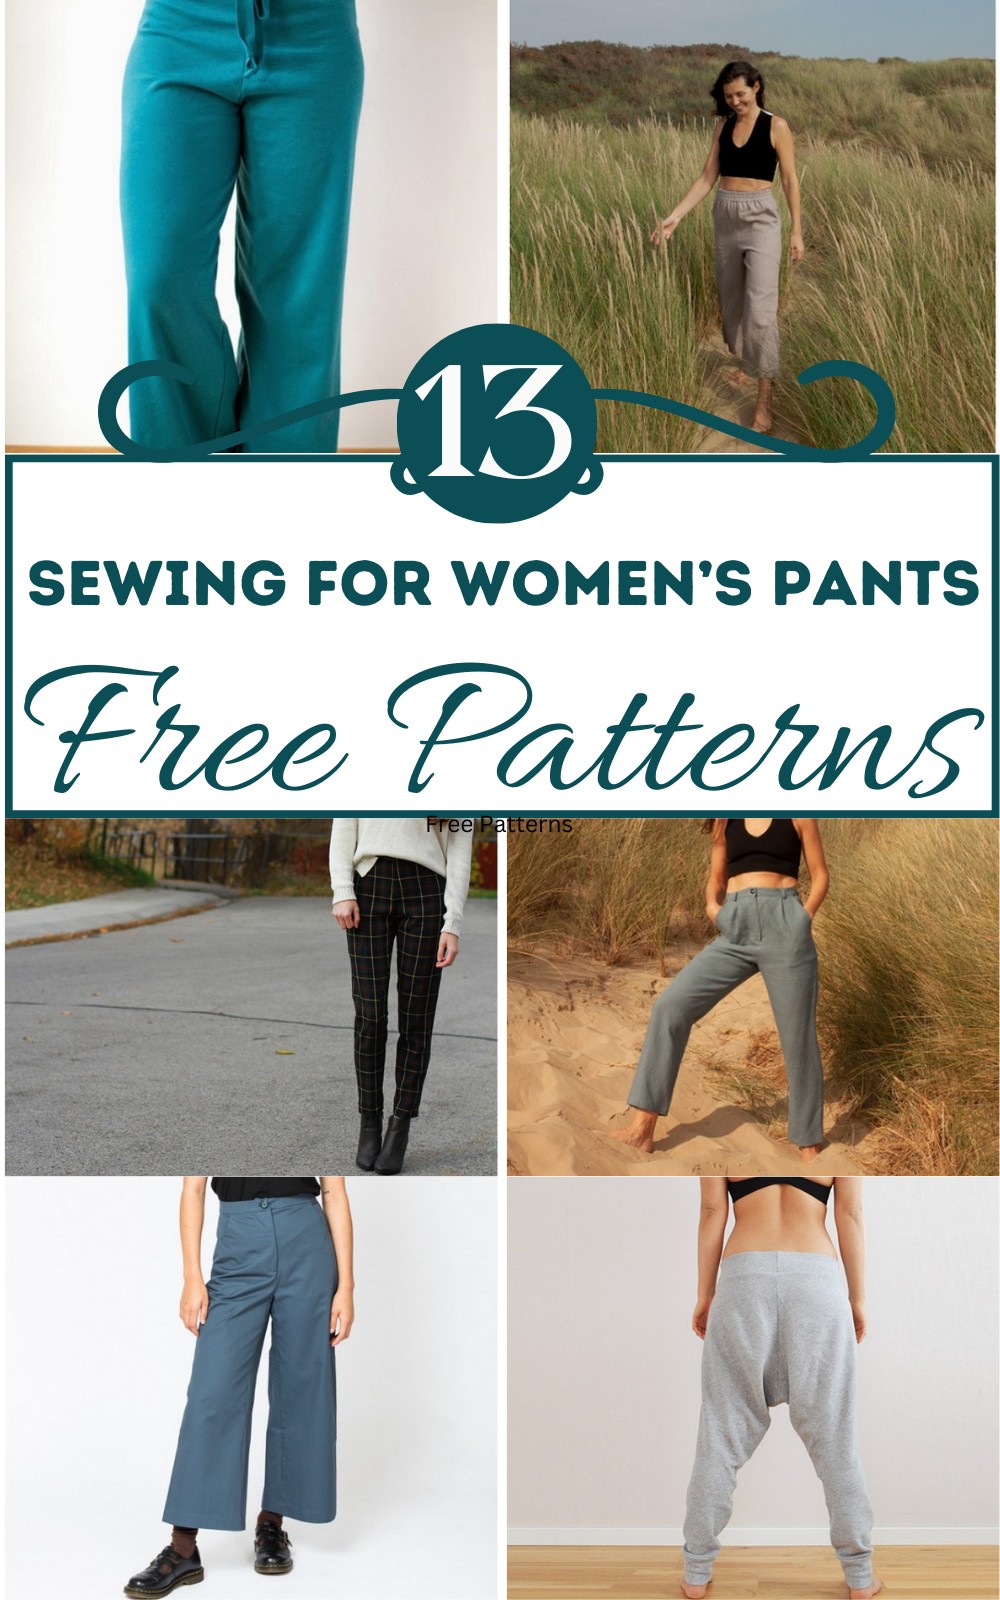 13 Free Sewing Patterns For Women’s Pants - Craftsy